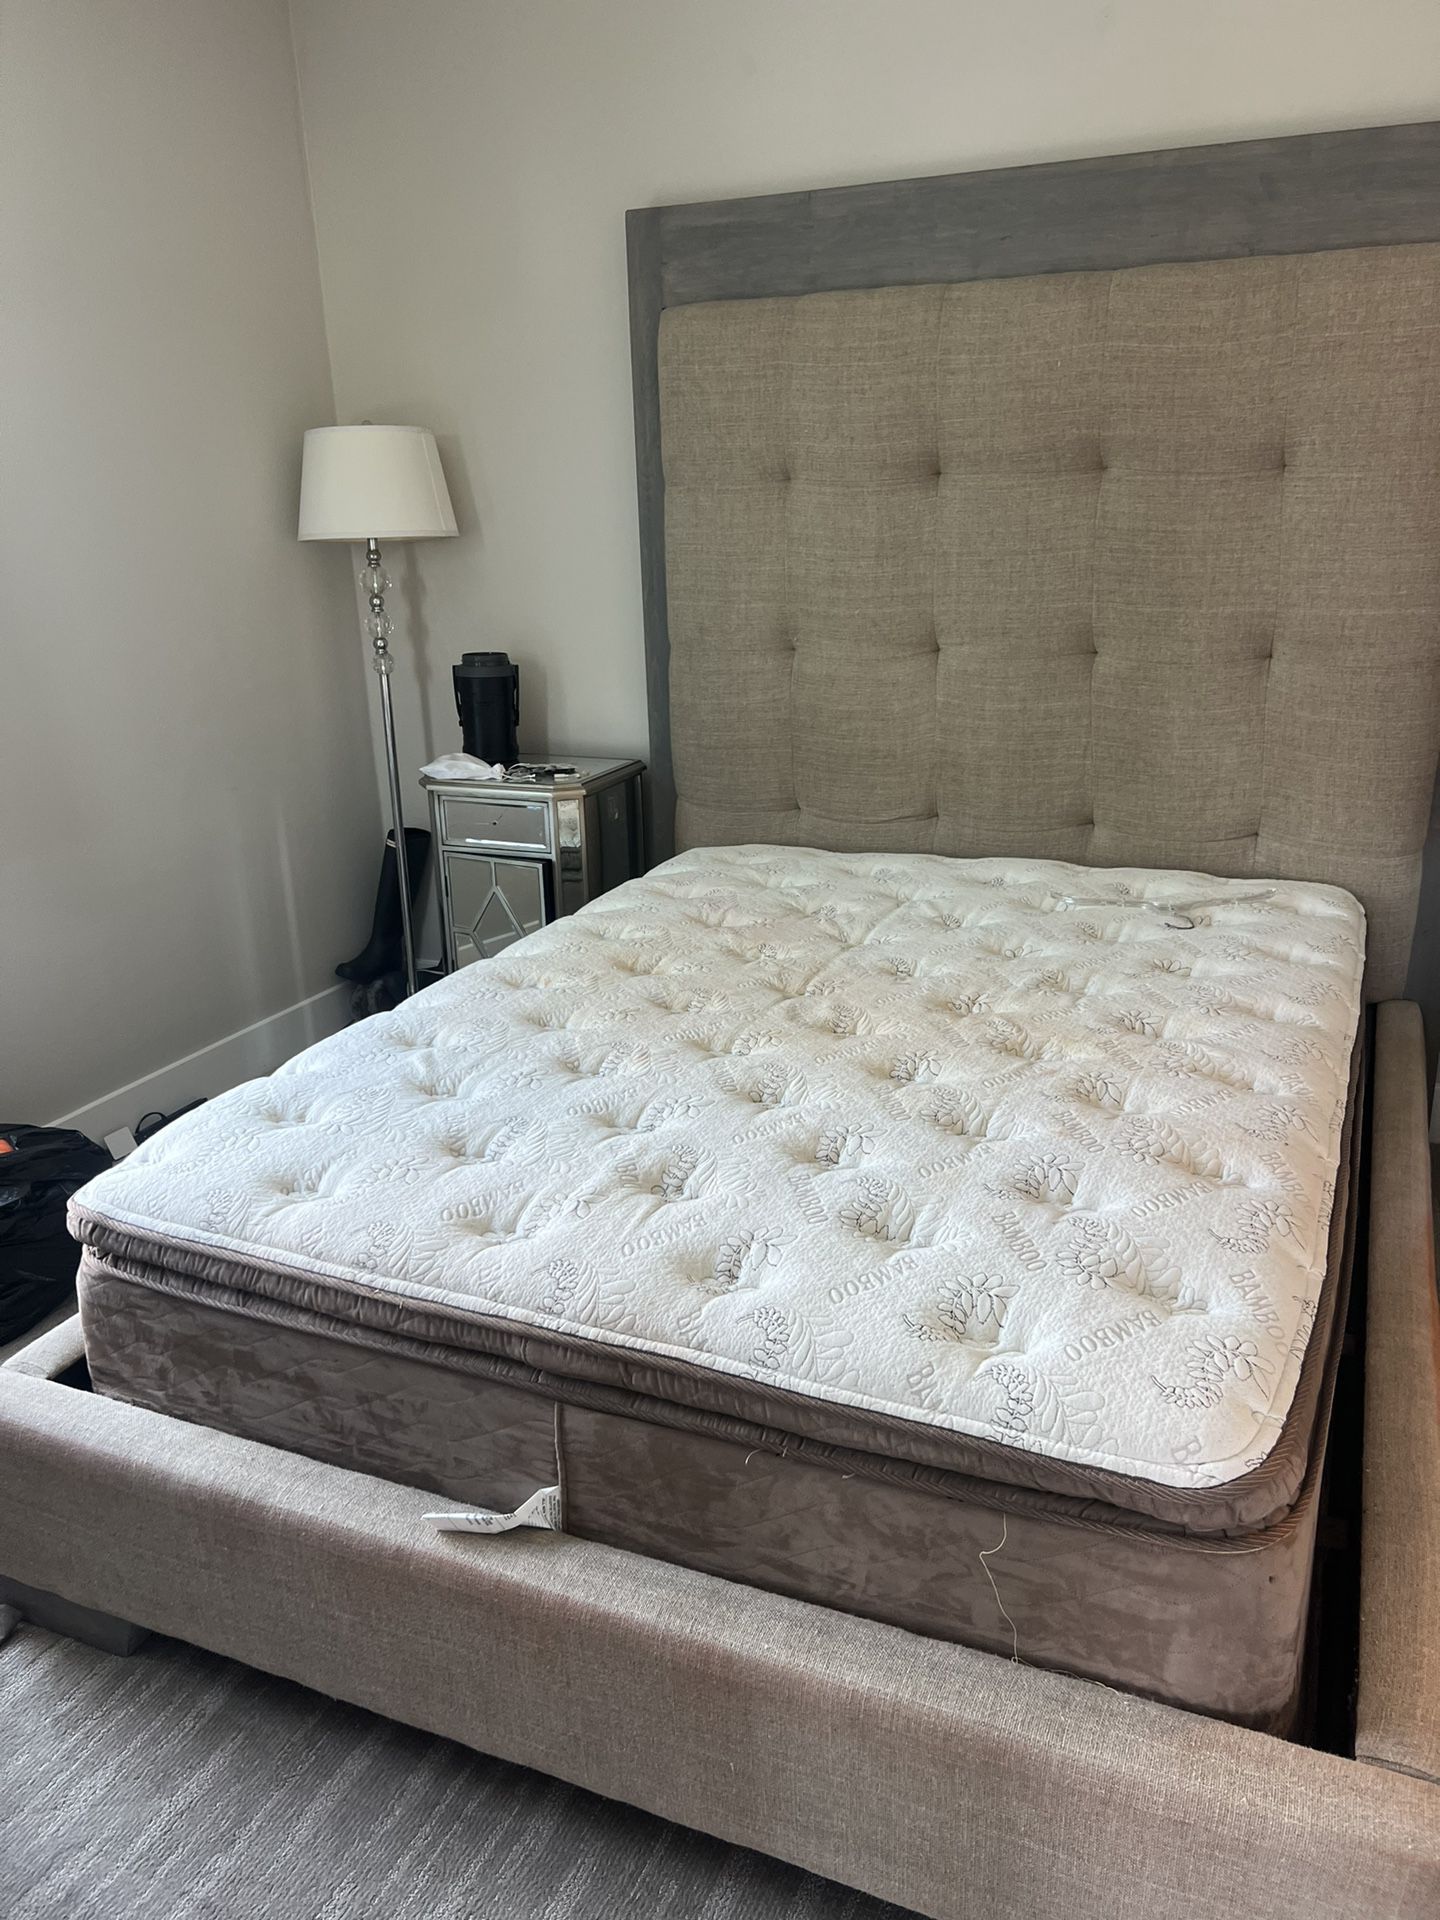 Queen Bed And Mattress - No Charge